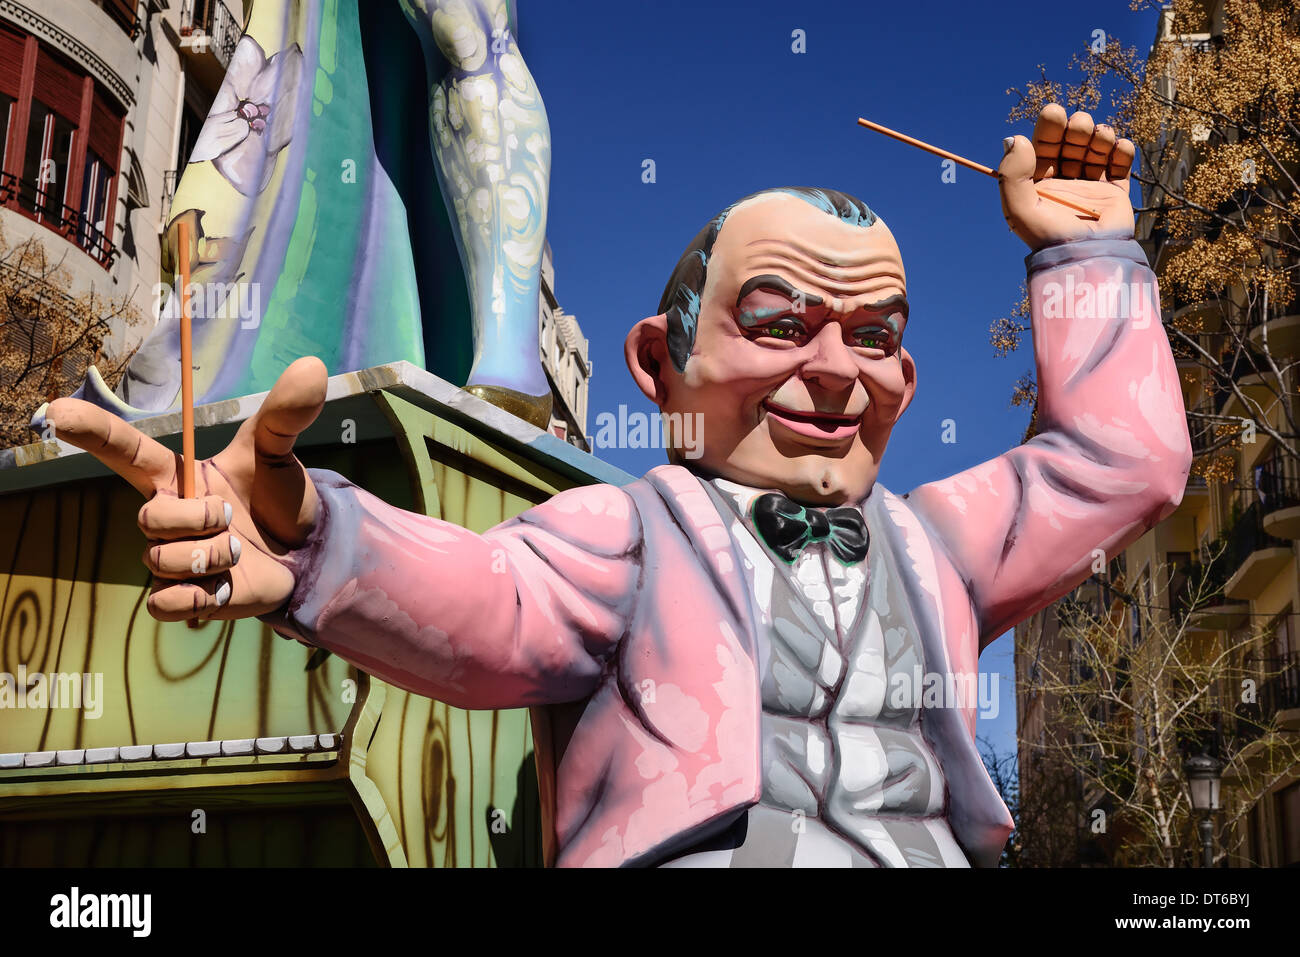 Spain, Valencia Province, Valencia, Papier Mache figure of a man in a pink jacket in the street during Las Fallas festival. Stock Photo